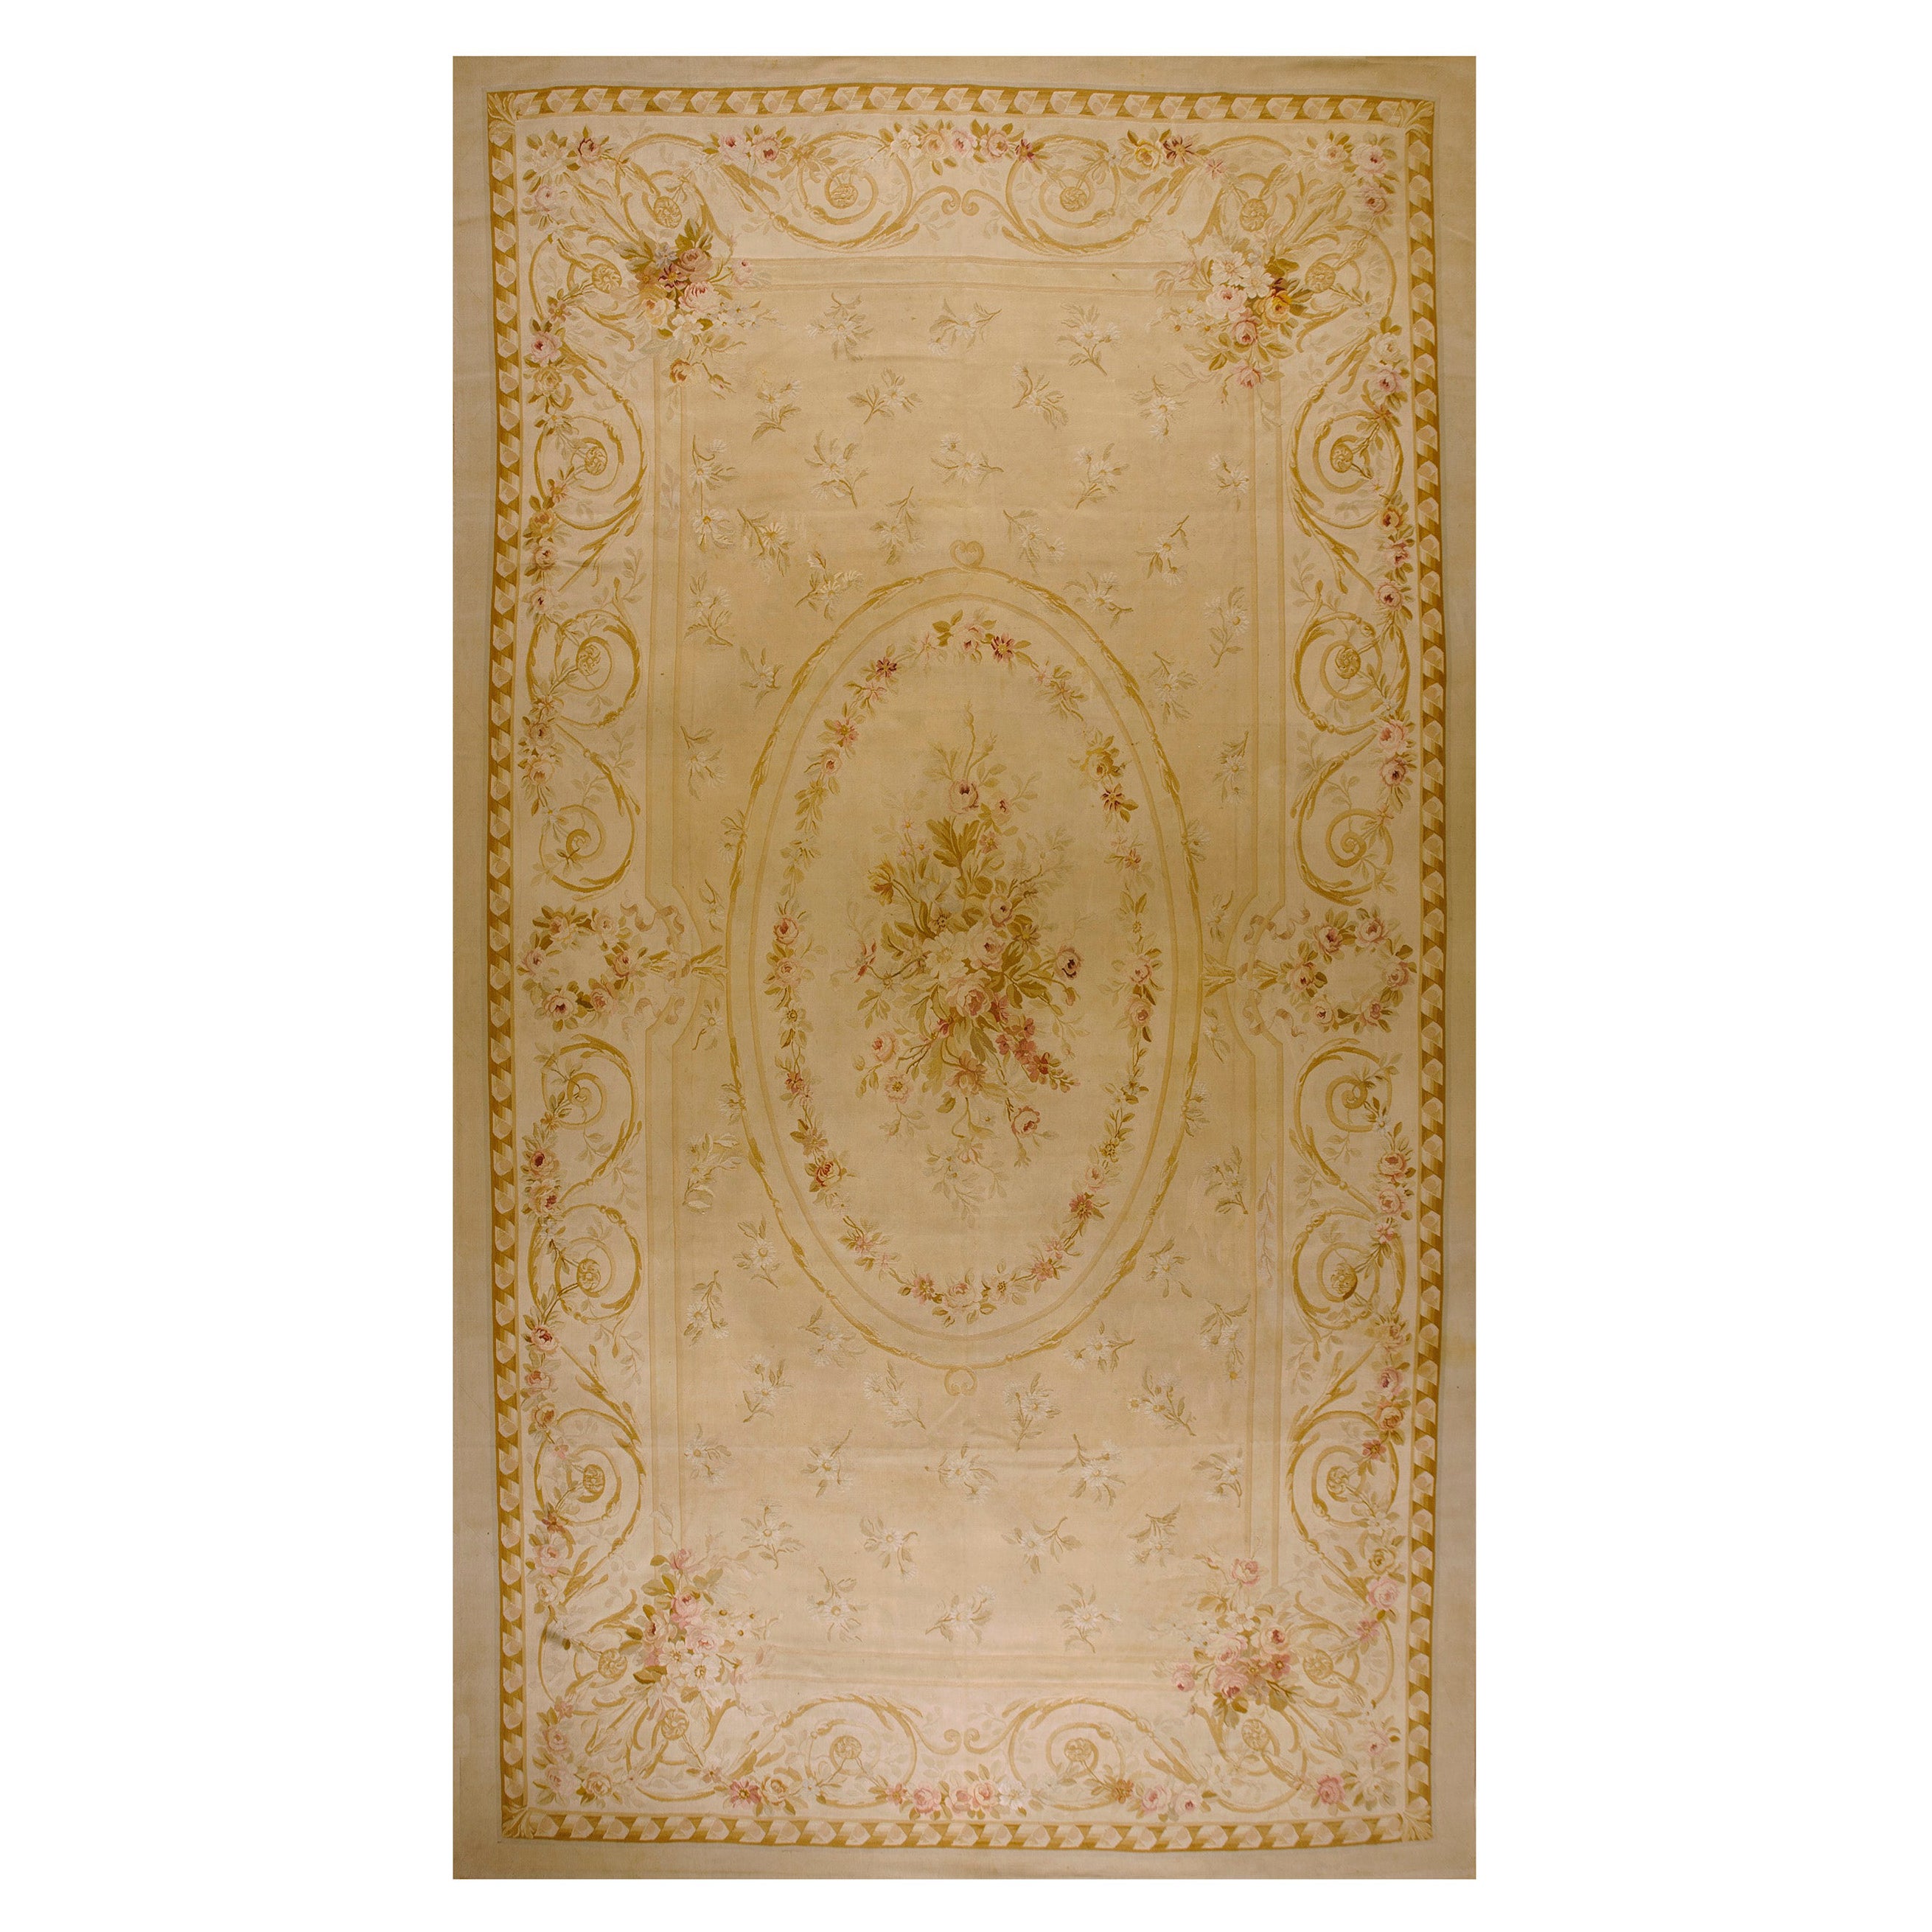 Late 19th Century French Aubusson Carpet ( 10'2" x 17'3" - 310 x 556 ) For Sale